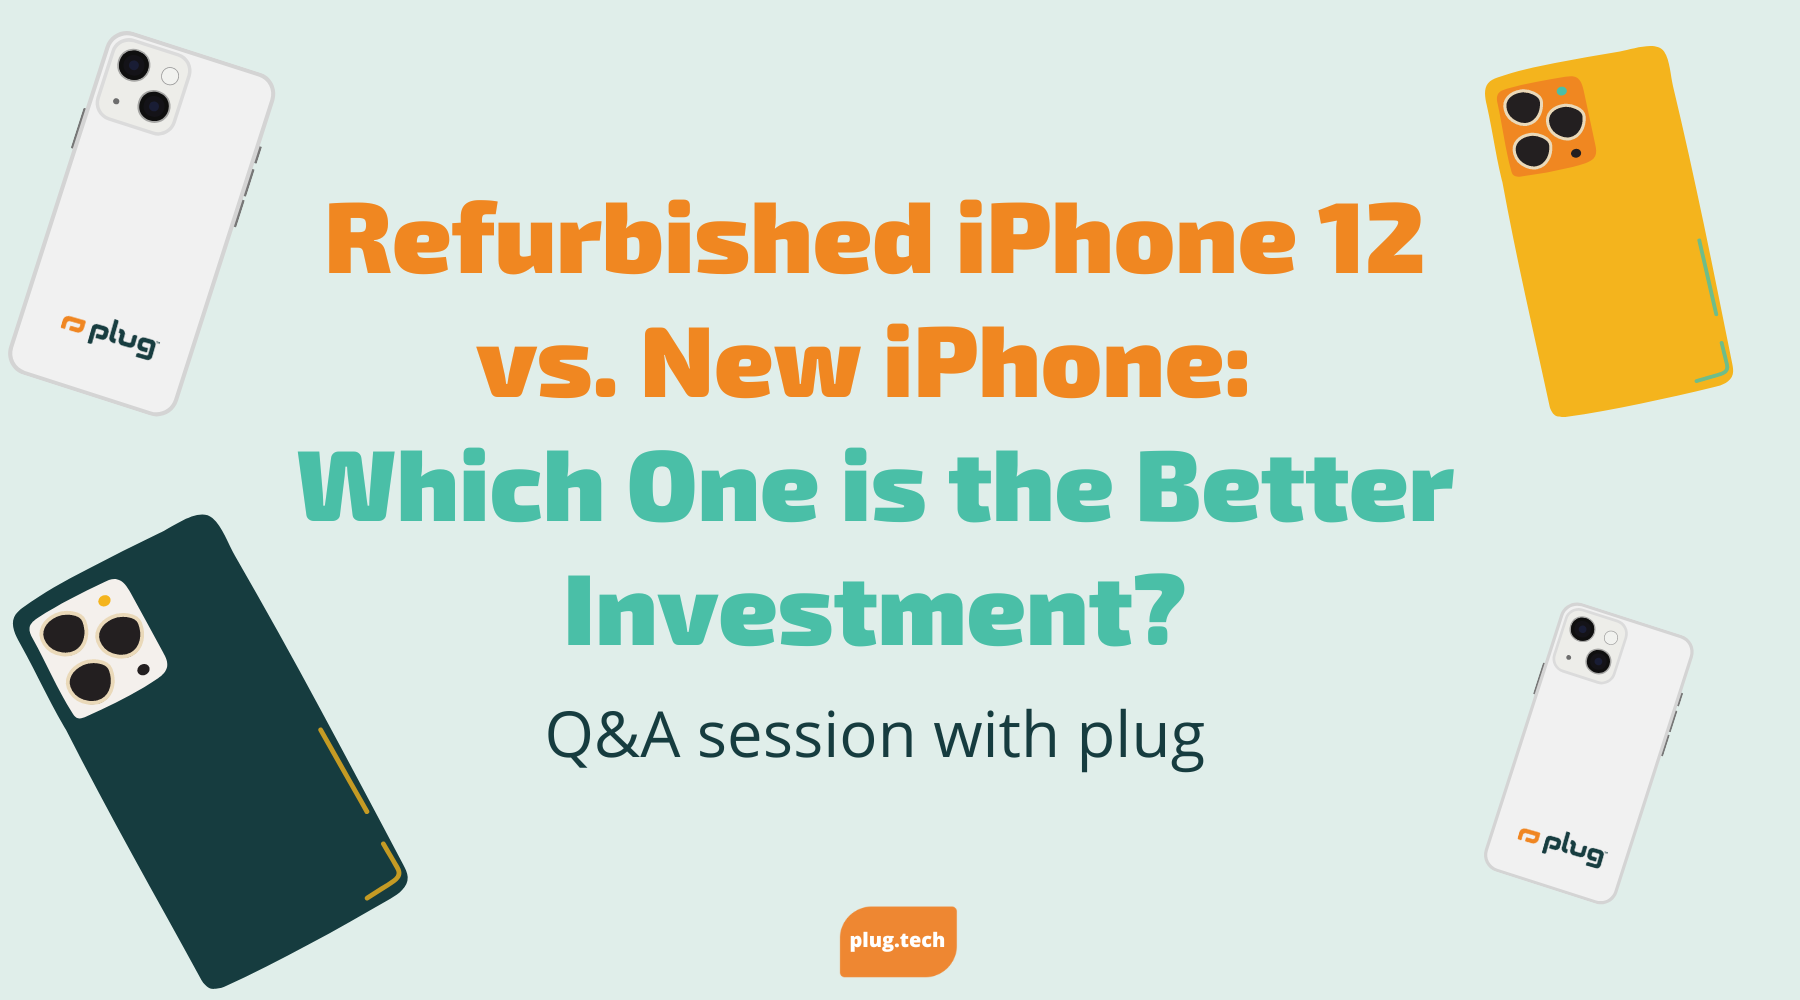 Refurbished iPhone 12 vs. New iPhone: Which One is the Better Investment?